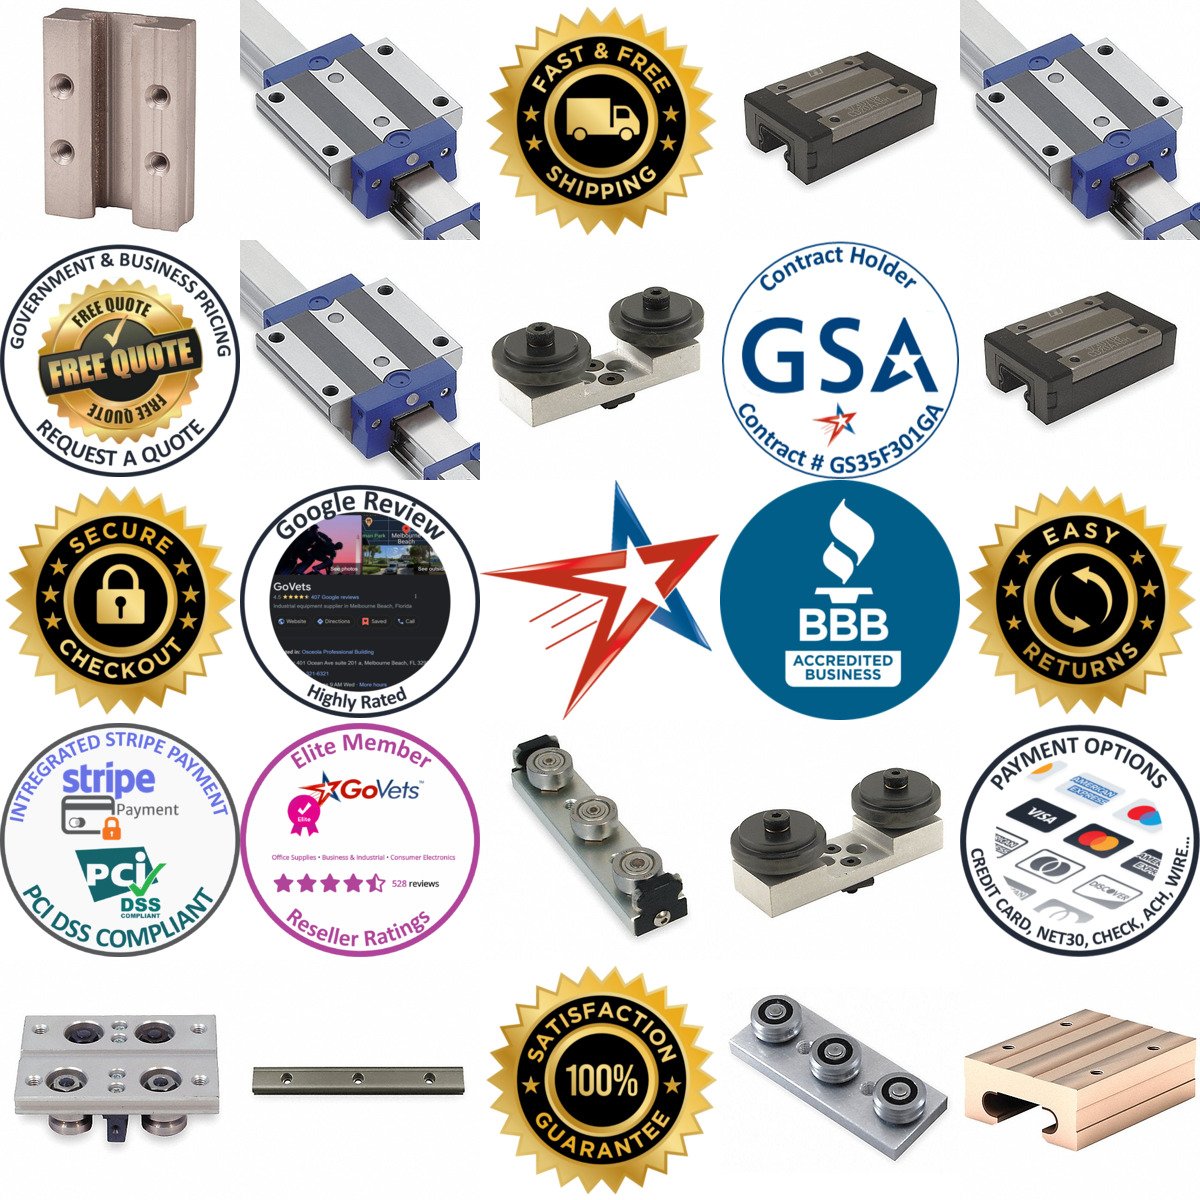 A selection of Linear Guide Carriages and Slides products on GoVets